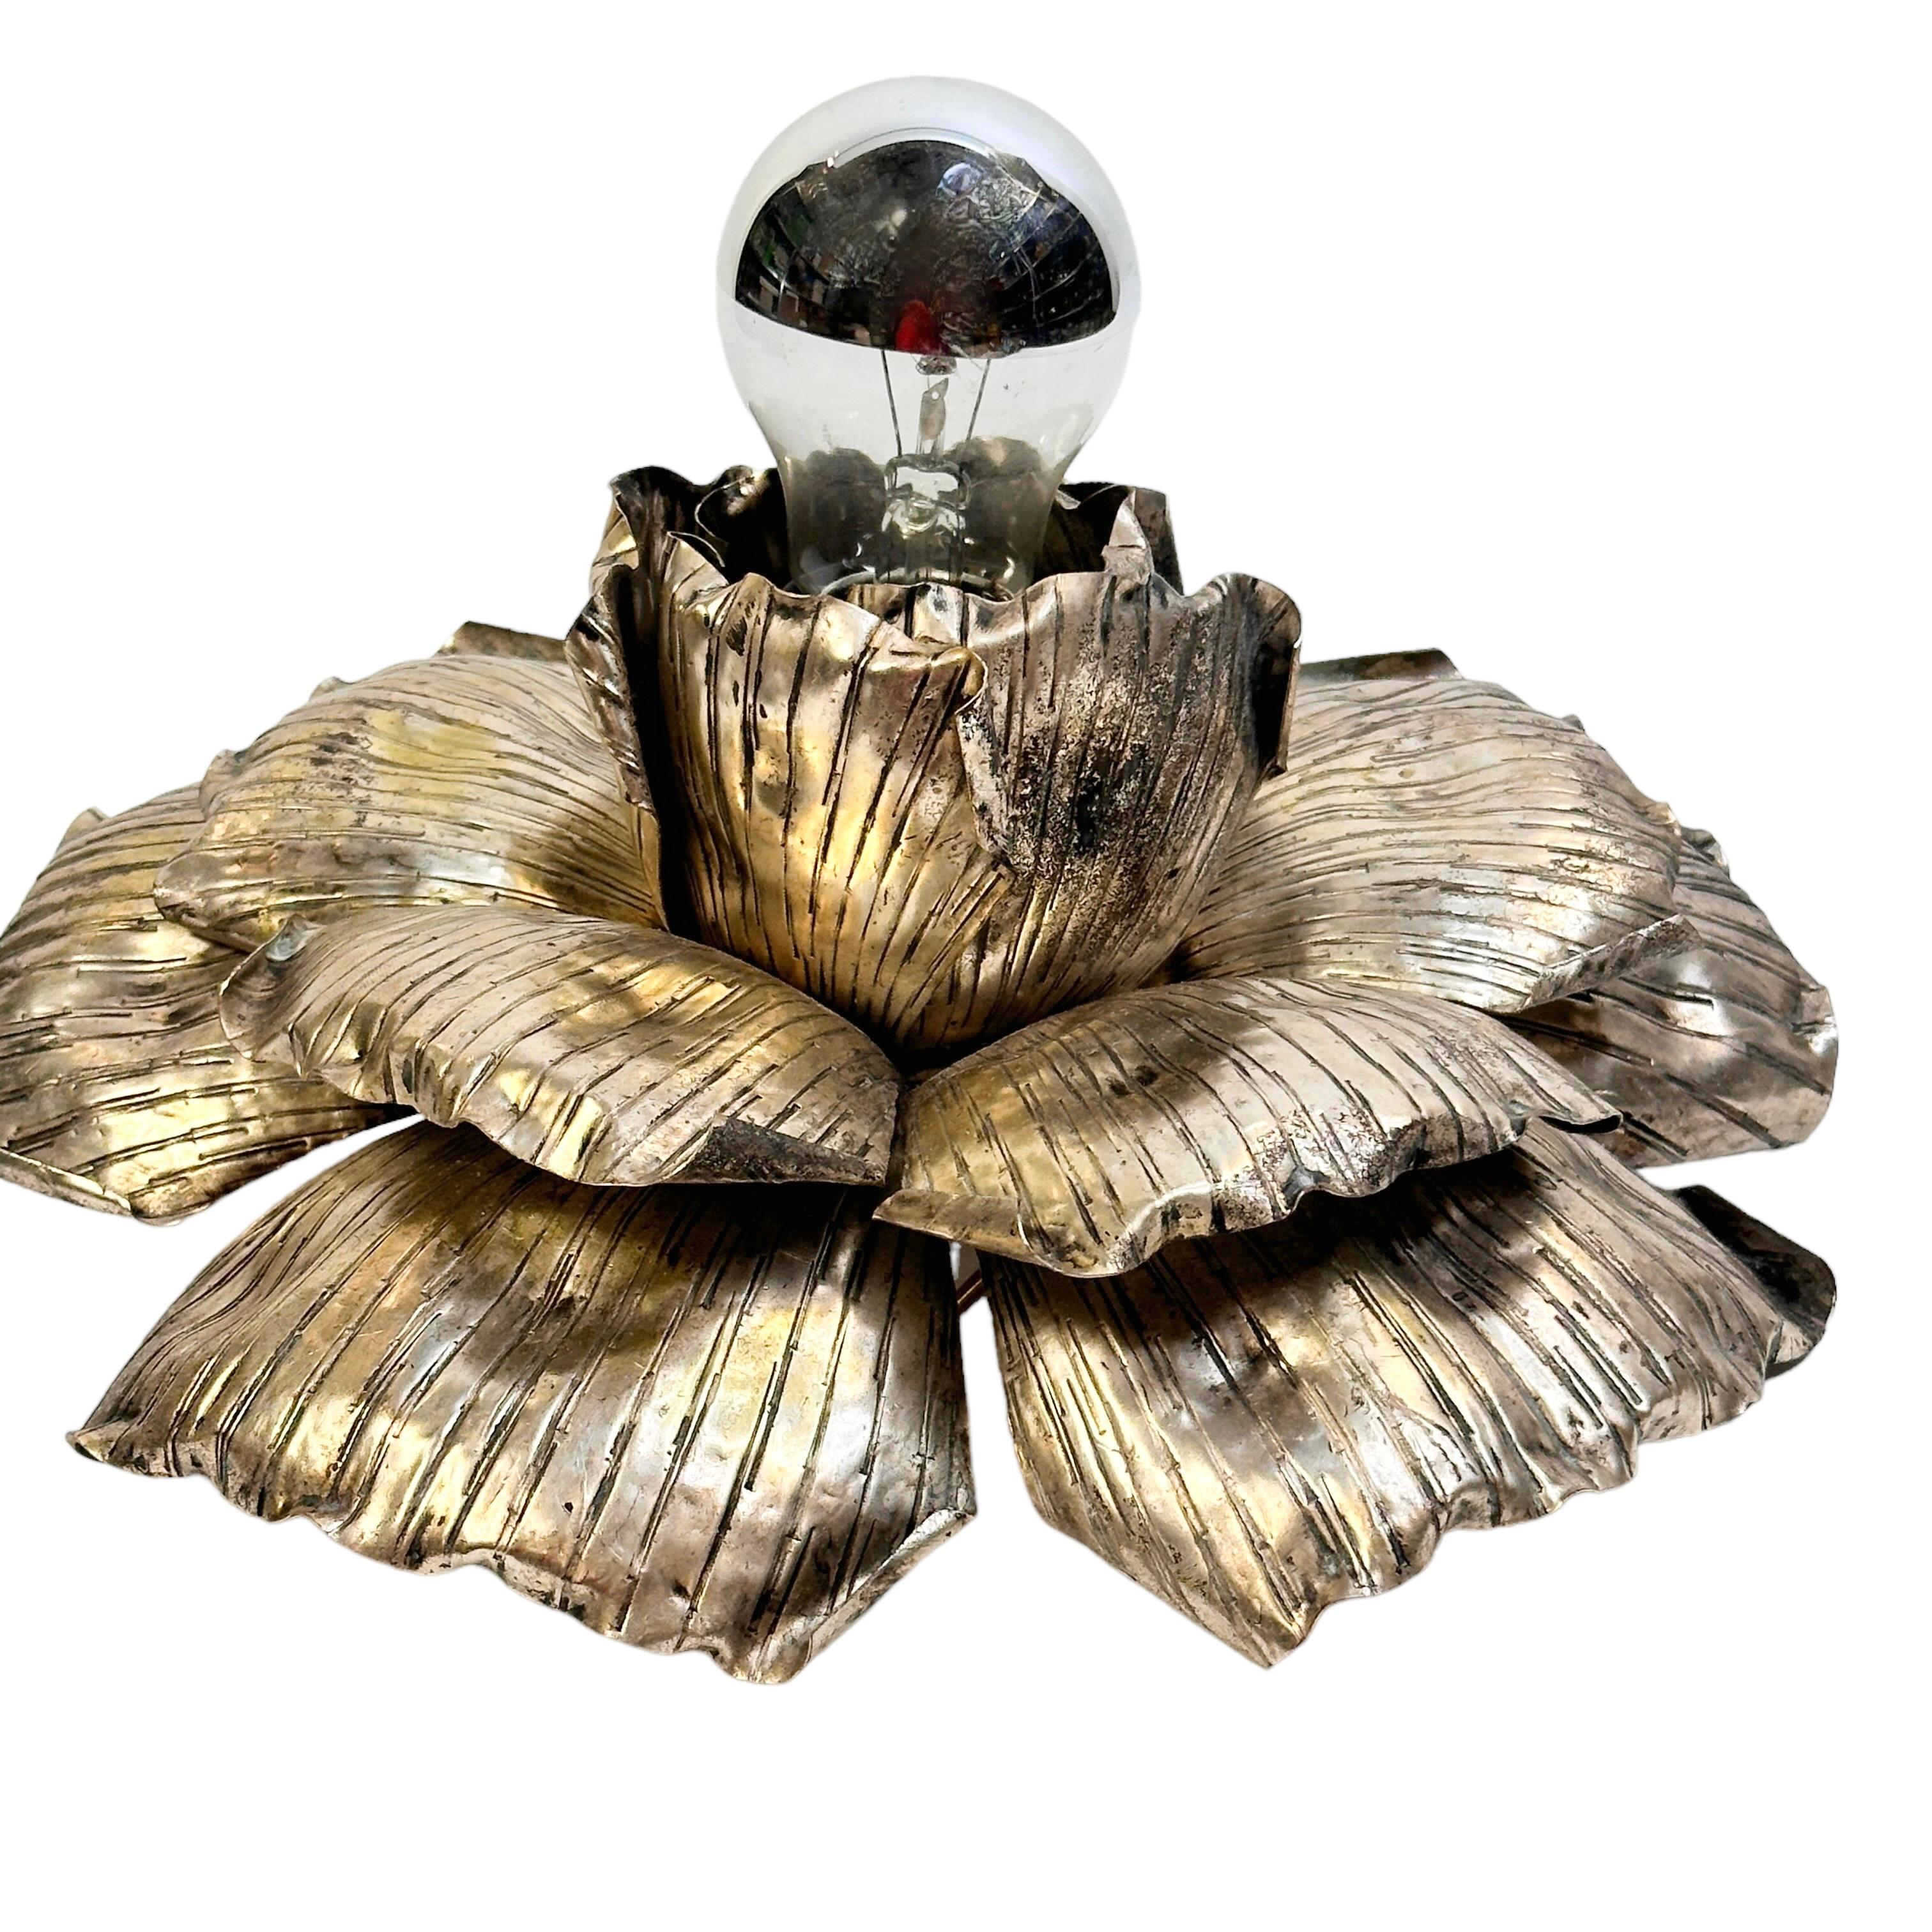 Add a touch of opulence to your home with this charming flush mount or wall light. Perfect stunning distressed silvered flower design to enhance any chic or eclectic home. We'd love to see it hanging in an entryway as a charming welcome home. You